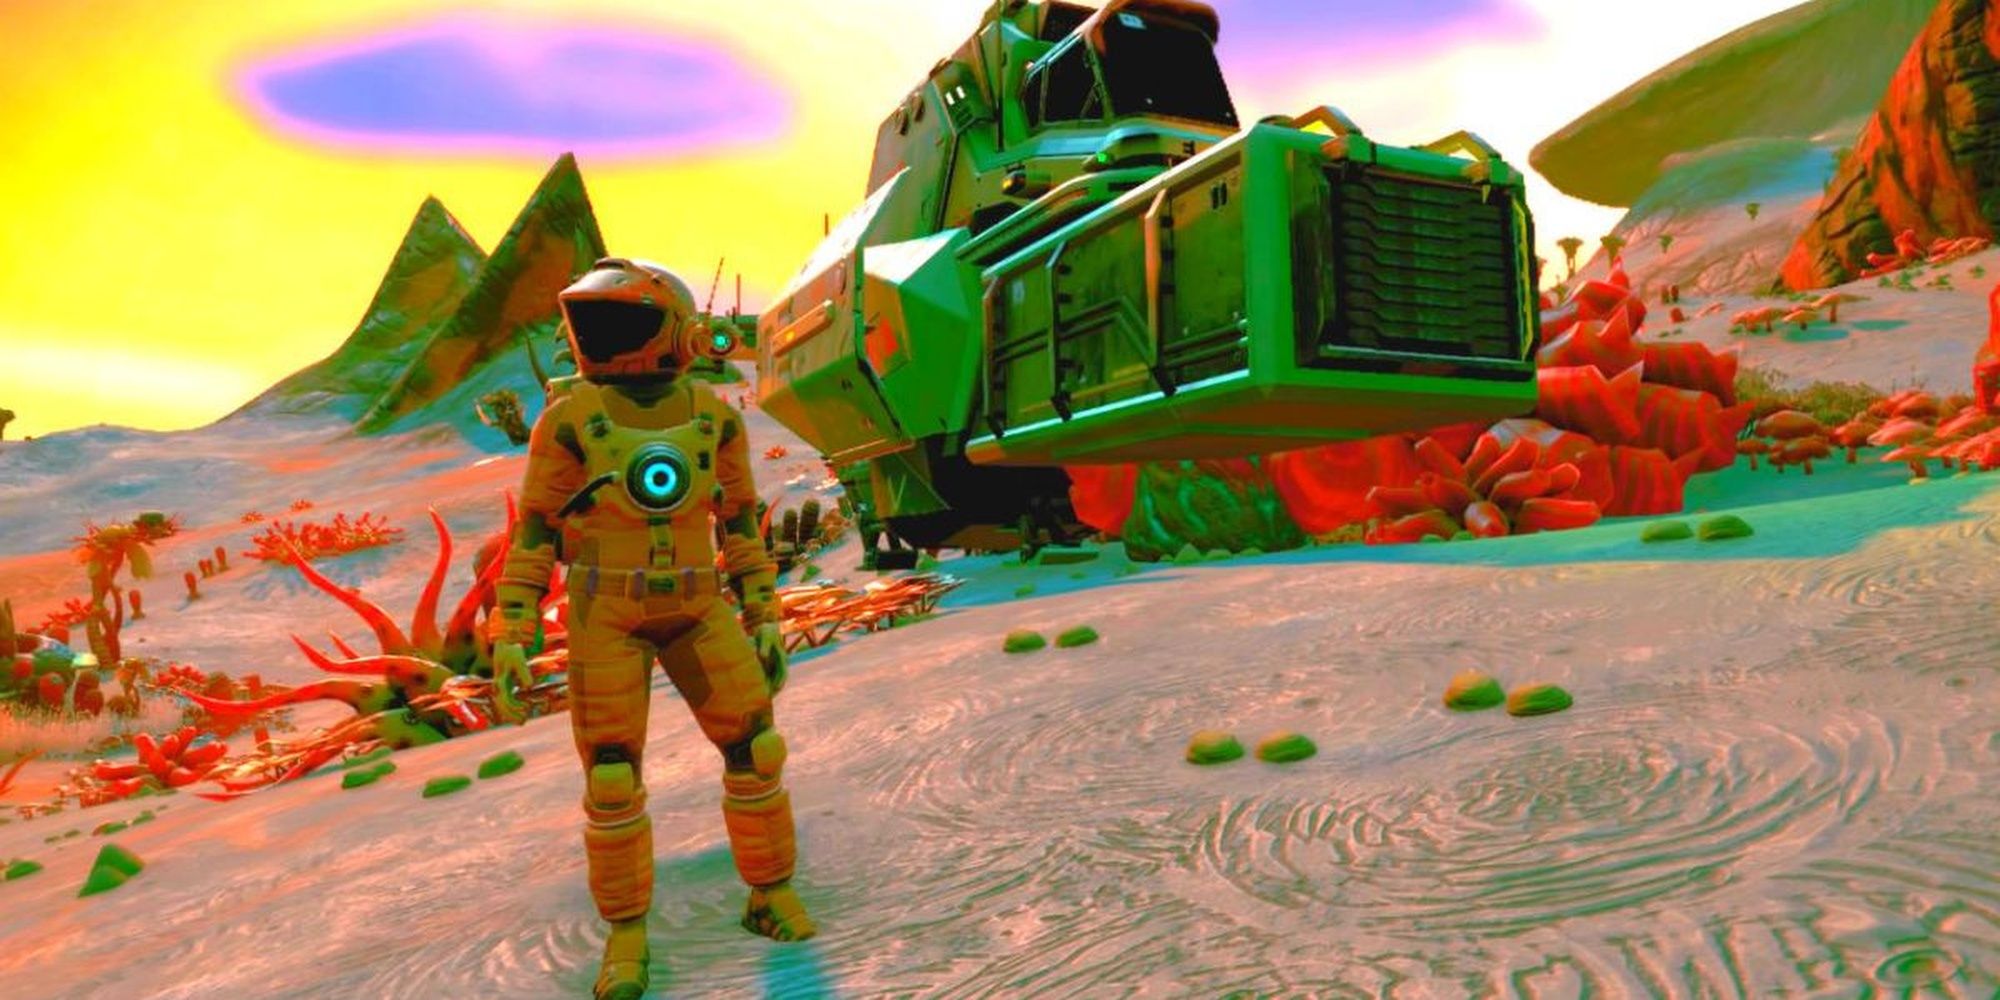 No Man's Sky: A Player Created Traveller And Their Starship On An Alien World